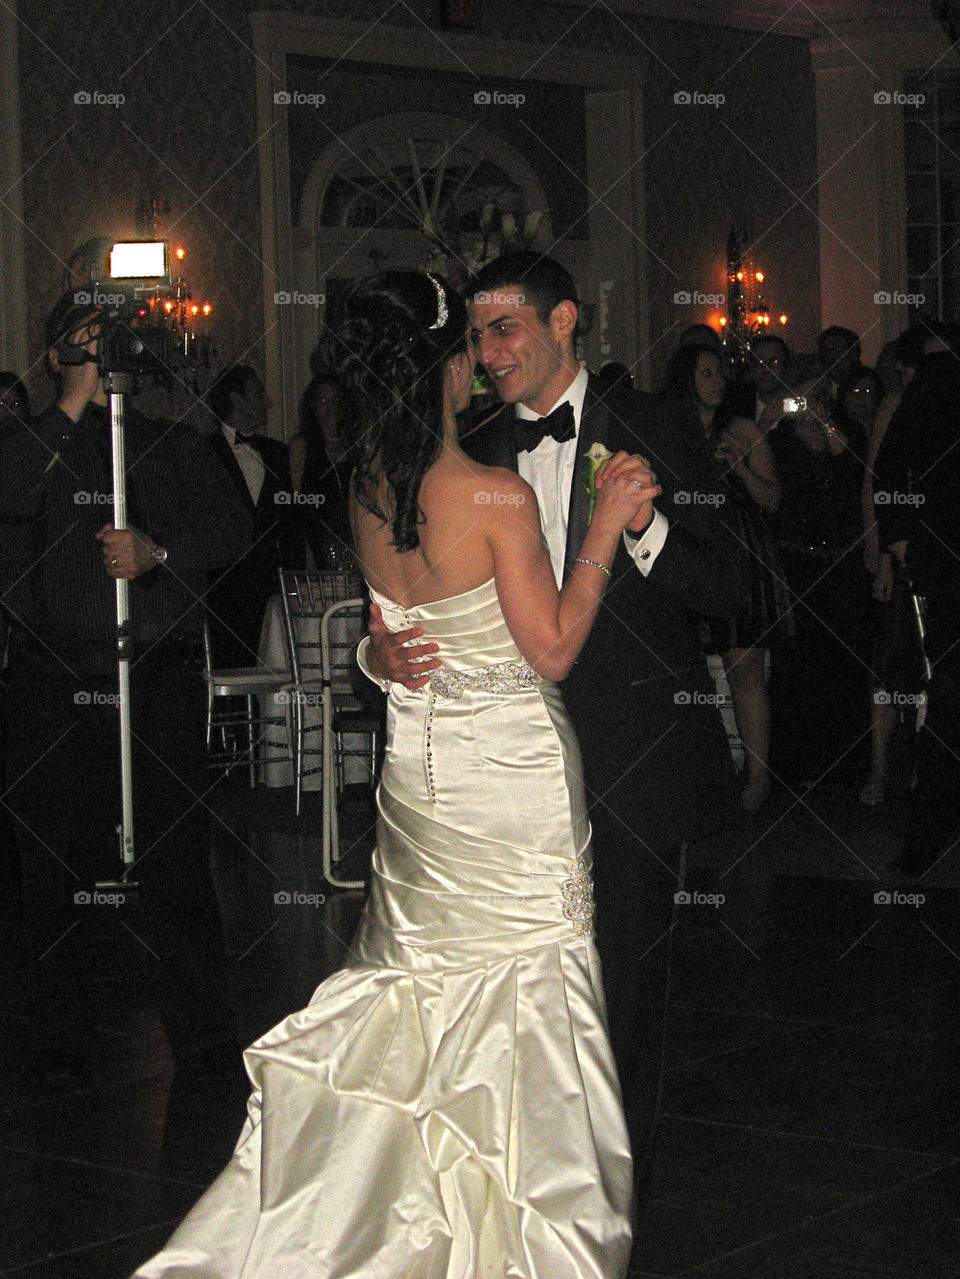 THE FIRST DANCE